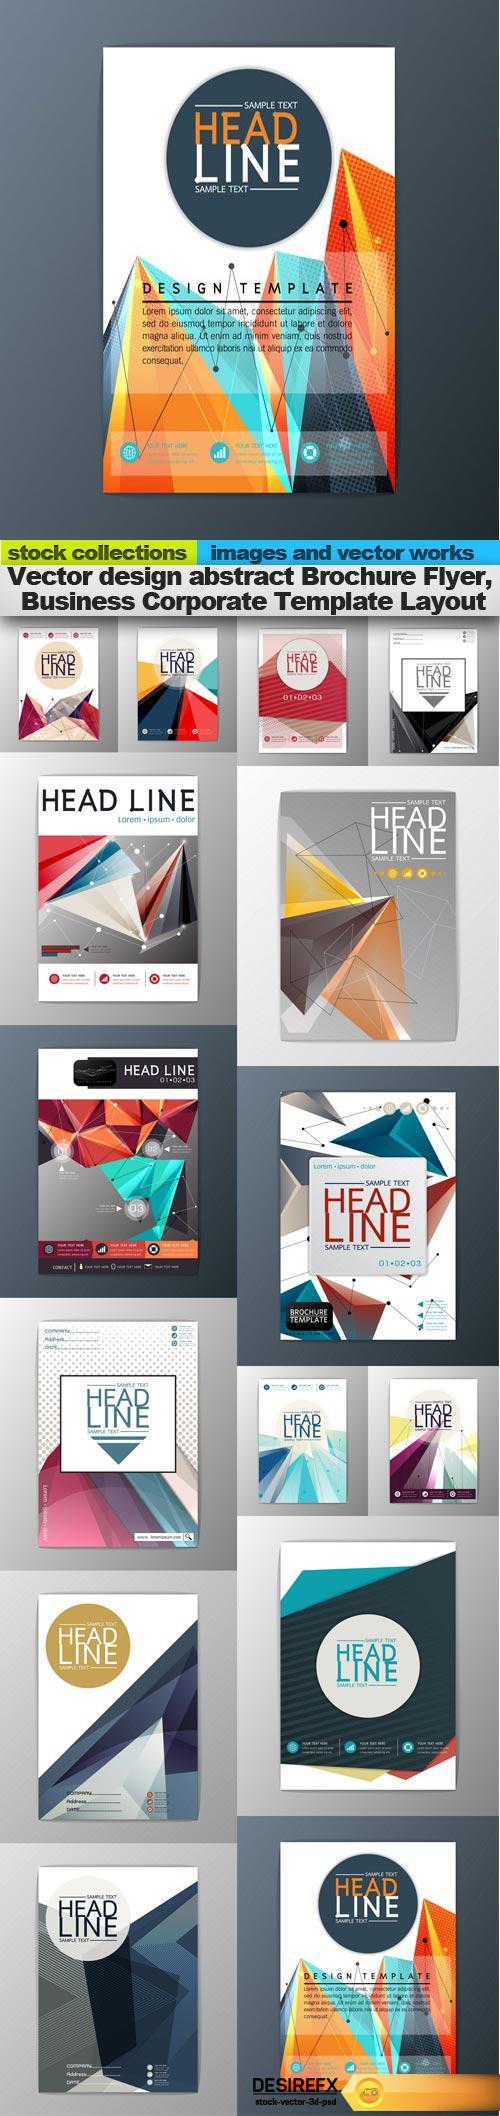 Vector design abstract Brochure Flyer, Business Corporate Template Layout, 15 x EPS